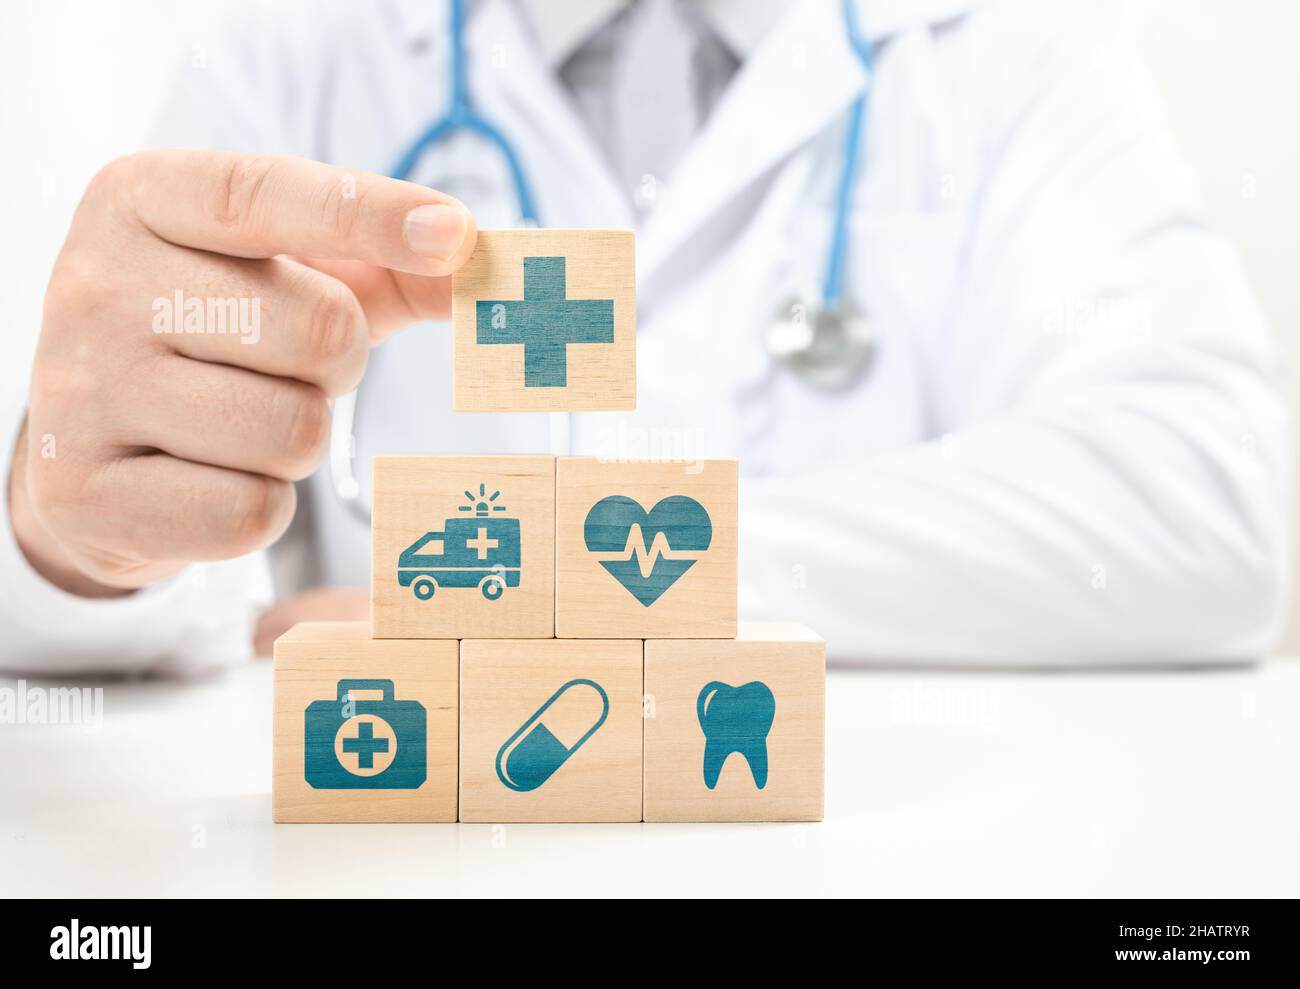 Healthcare and Insurance concept. Doctor hand choose cross sign on wood cube block. Health care insurance or service concept. Medical healthcare icons Stock Photo